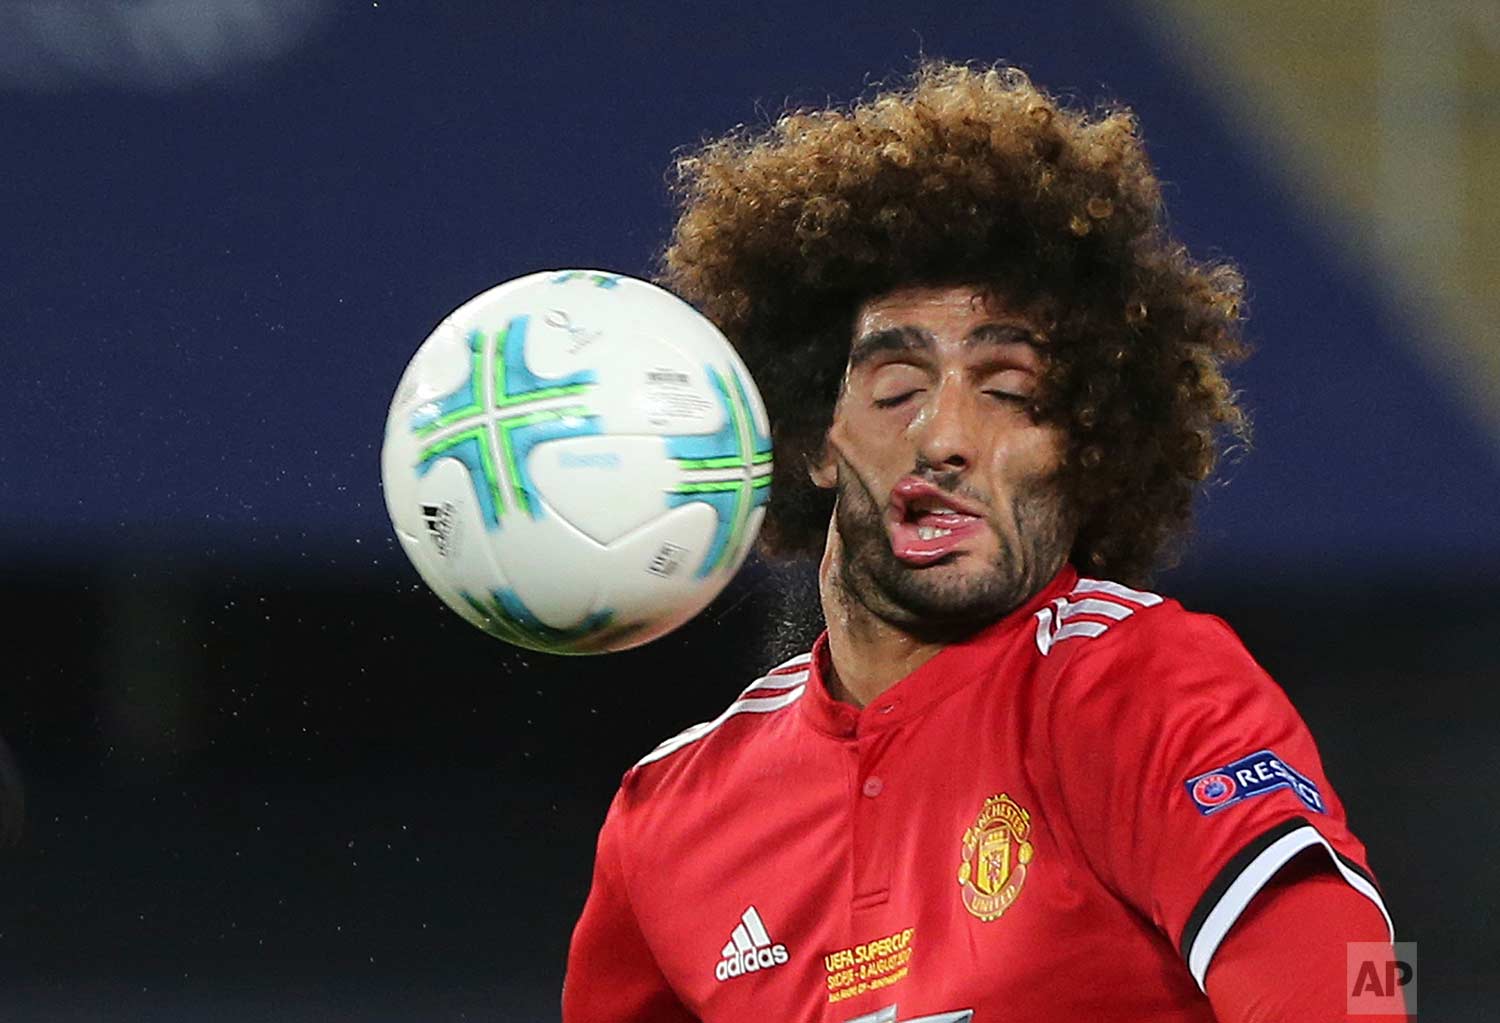  Manchester United's Marouane Fellaini heads the ball during the UEFA Super Cup final soccer match between Real Madrid and Manchester United at Philip II Arena in Skopje, on Aug. 8, 2017. (AP Photo/Boris Grdanoski) 